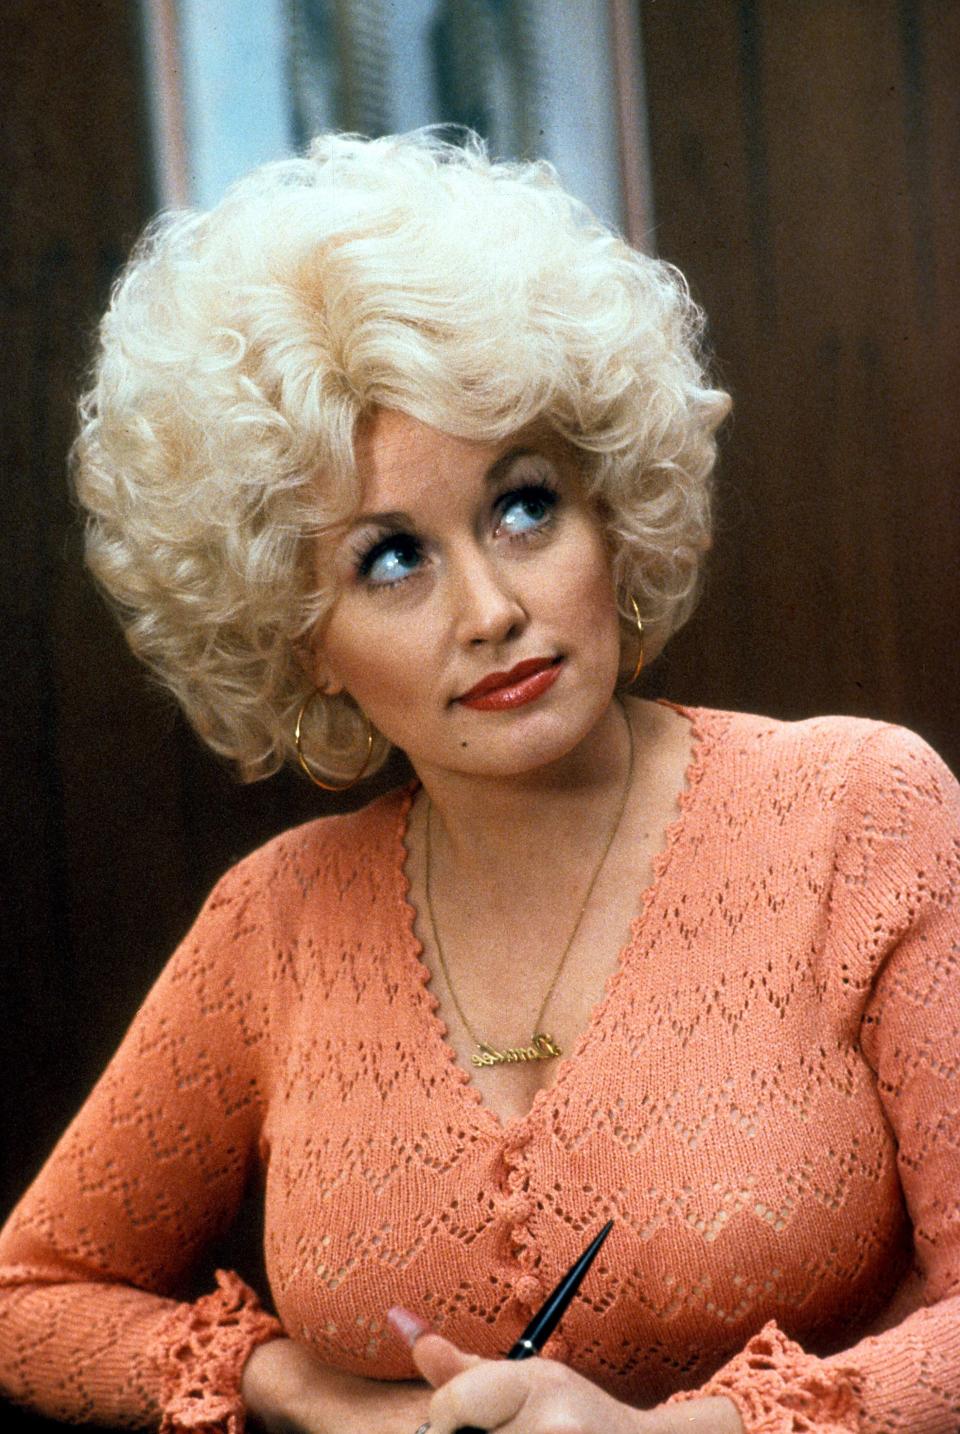 Dolly Parton in a scene from the film 'Nine To Five', 1980. (Photo by 20th Century-Fox/Getty Images)